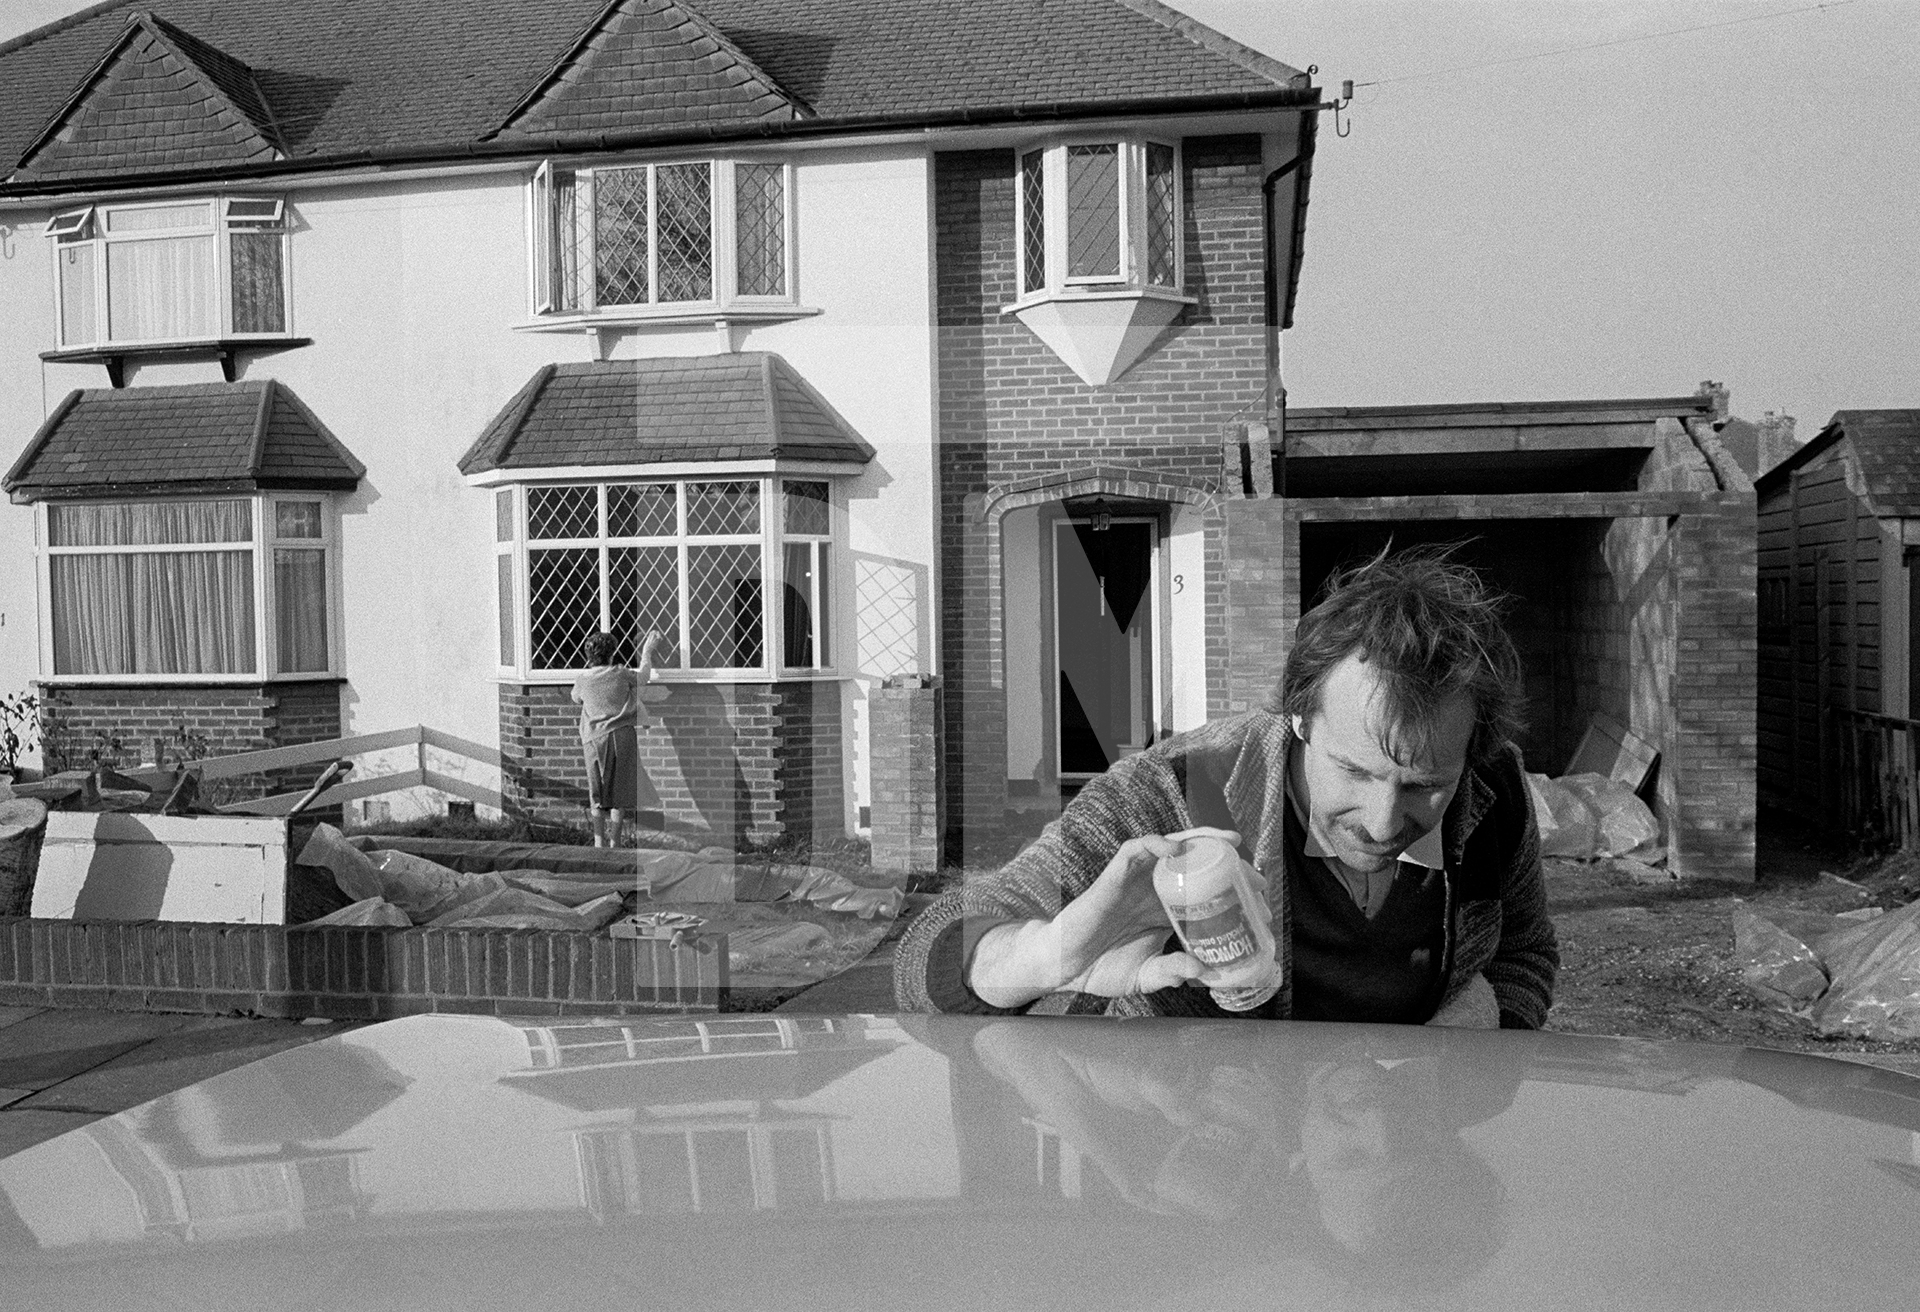 Polishing the car, cleaning windows. Hayes, Kent. February 1985 by Daniel Meadows